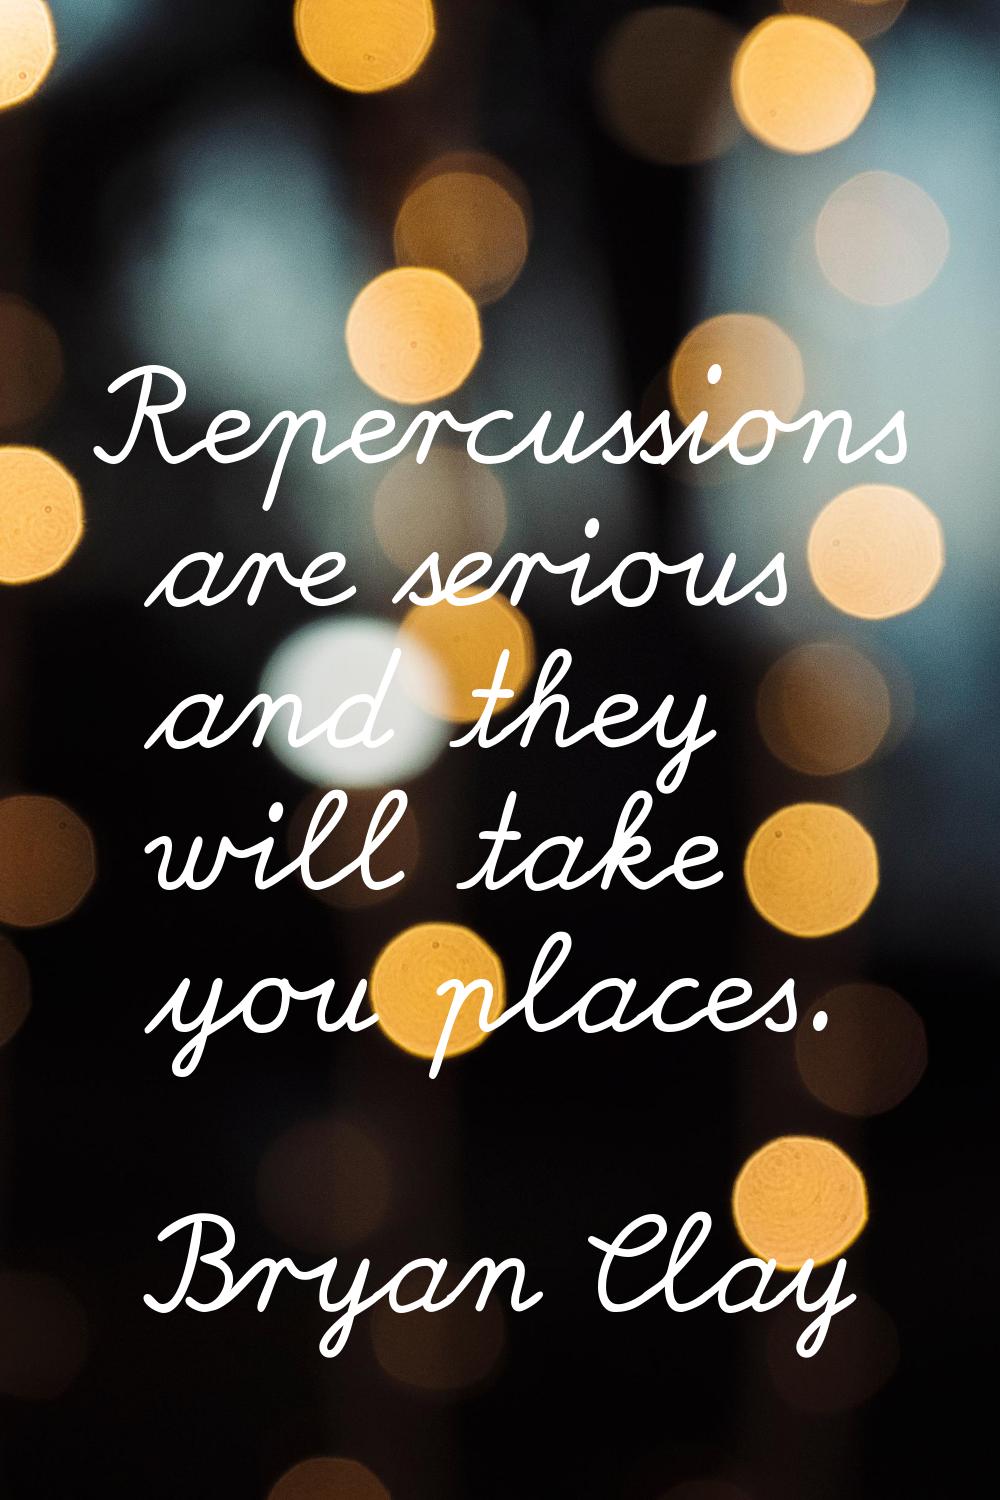 Repercussions are serious and they will take you places.